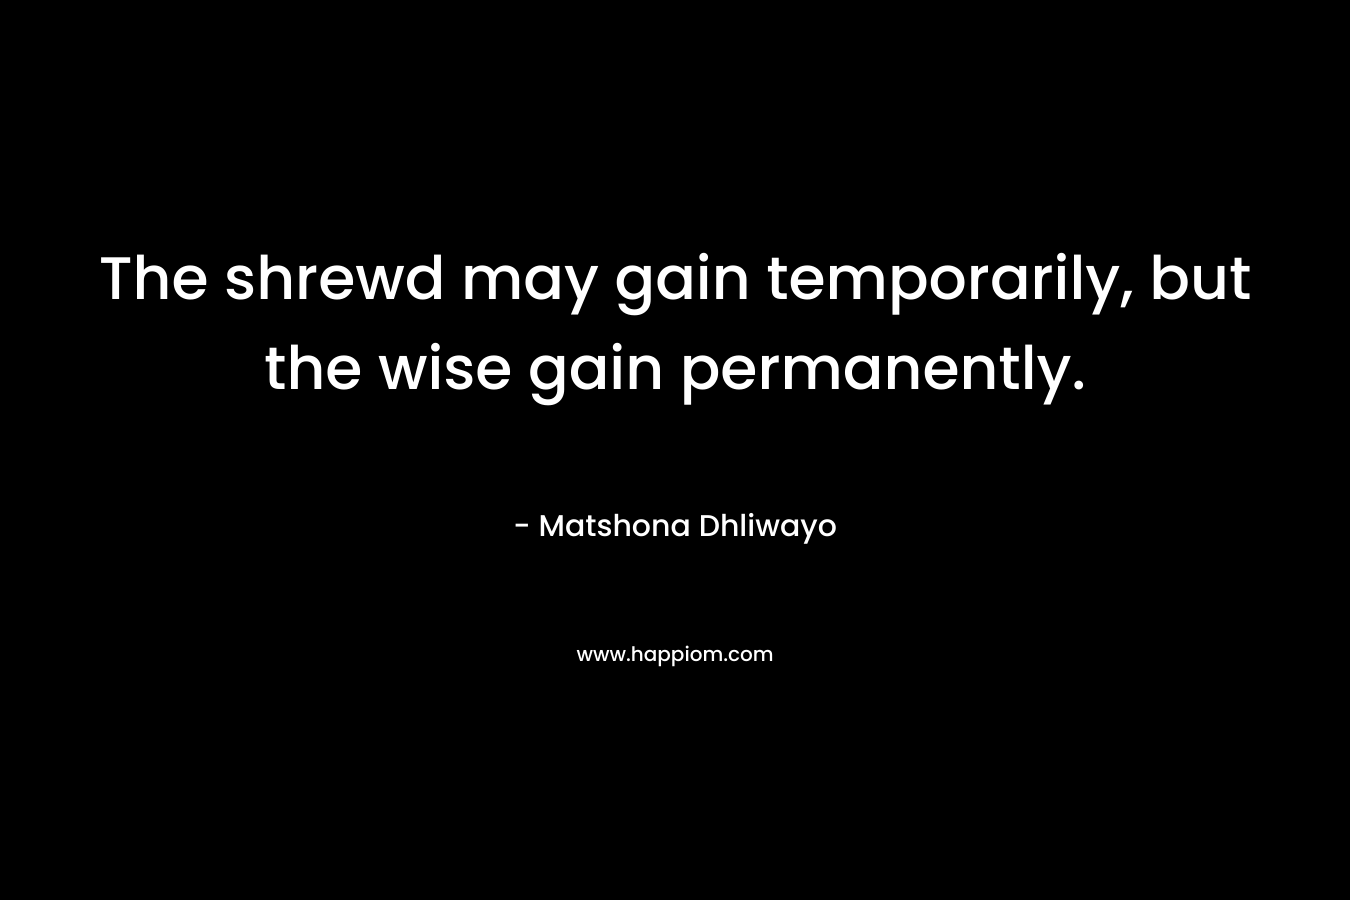 The shrewd may gain temporarily, but the wise gain permanently.